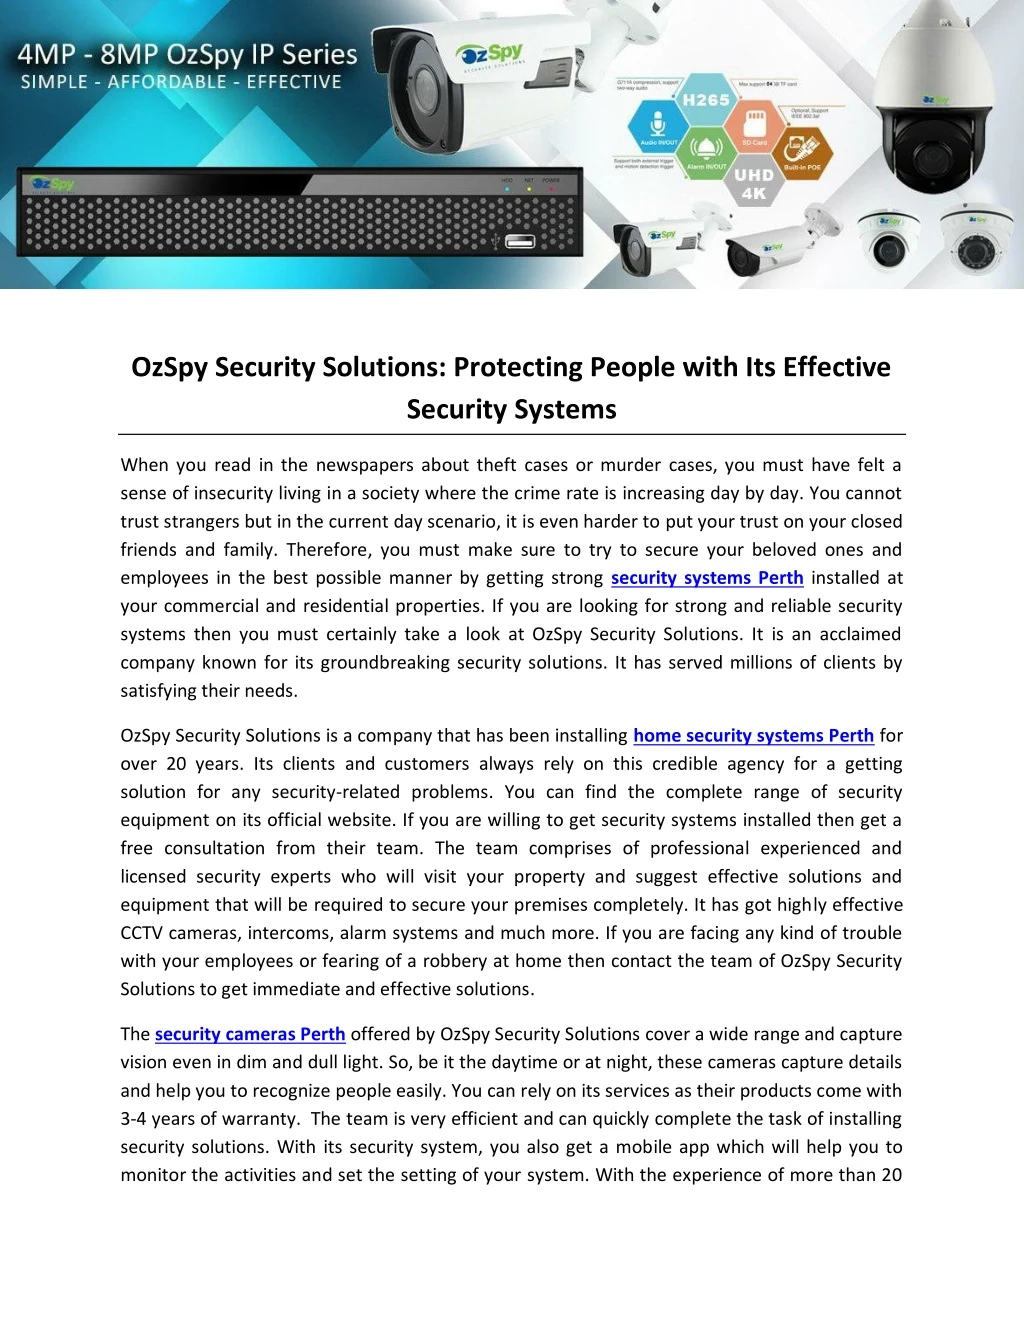 ozspy security solutions protecting people with